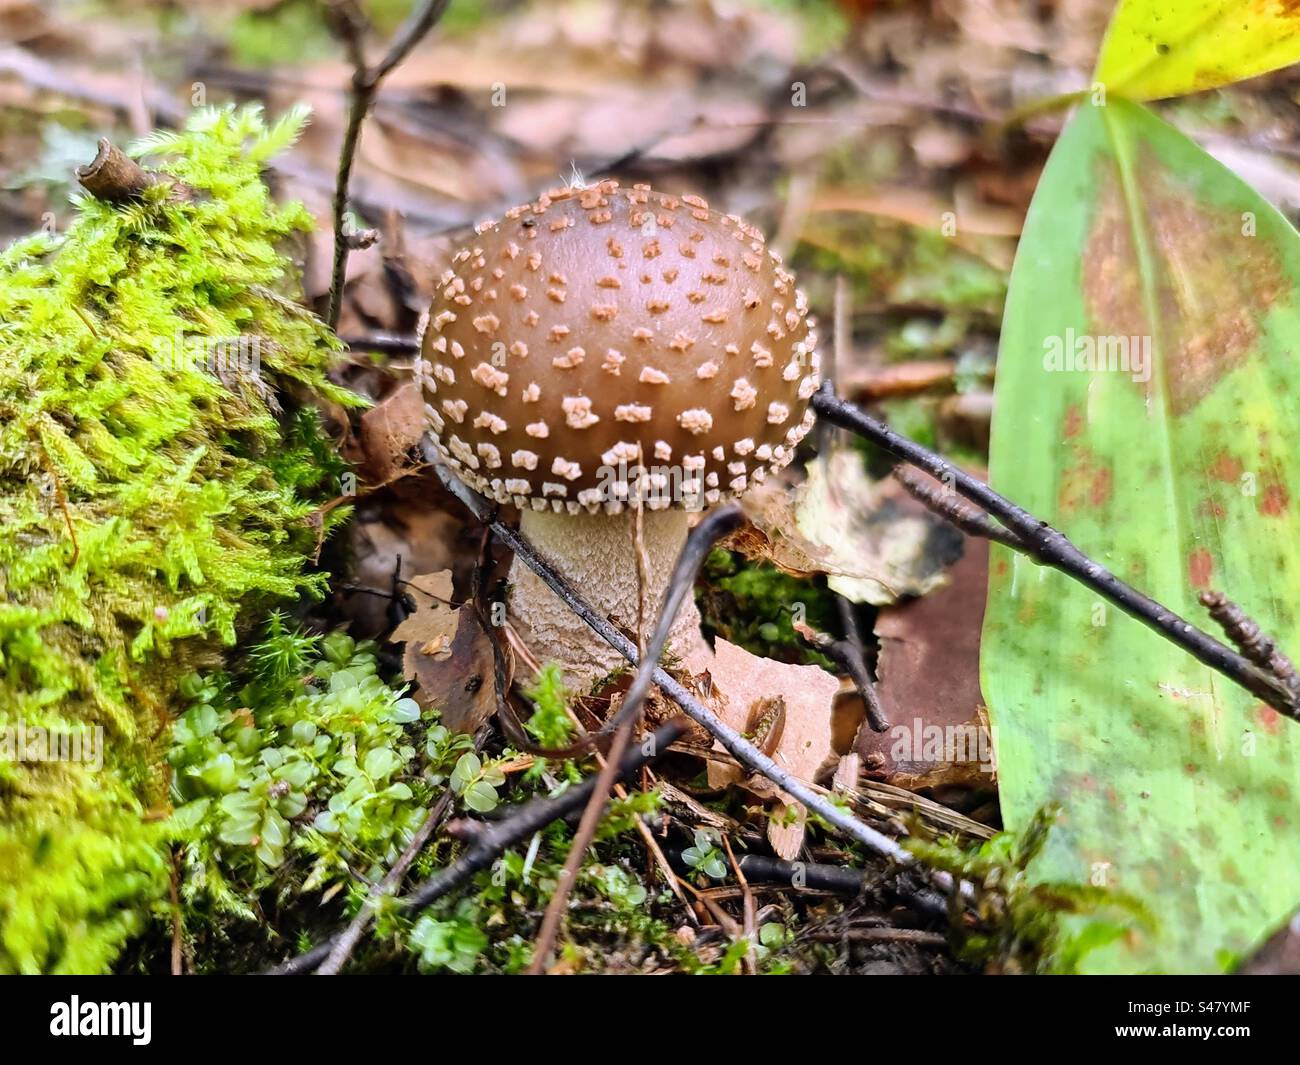 Single young brown cap amanita pantherina regalis excelsa muscaria royal fly agaric false blush fungi mushroom growing in the forest soil among moss and leaves Stock Photo